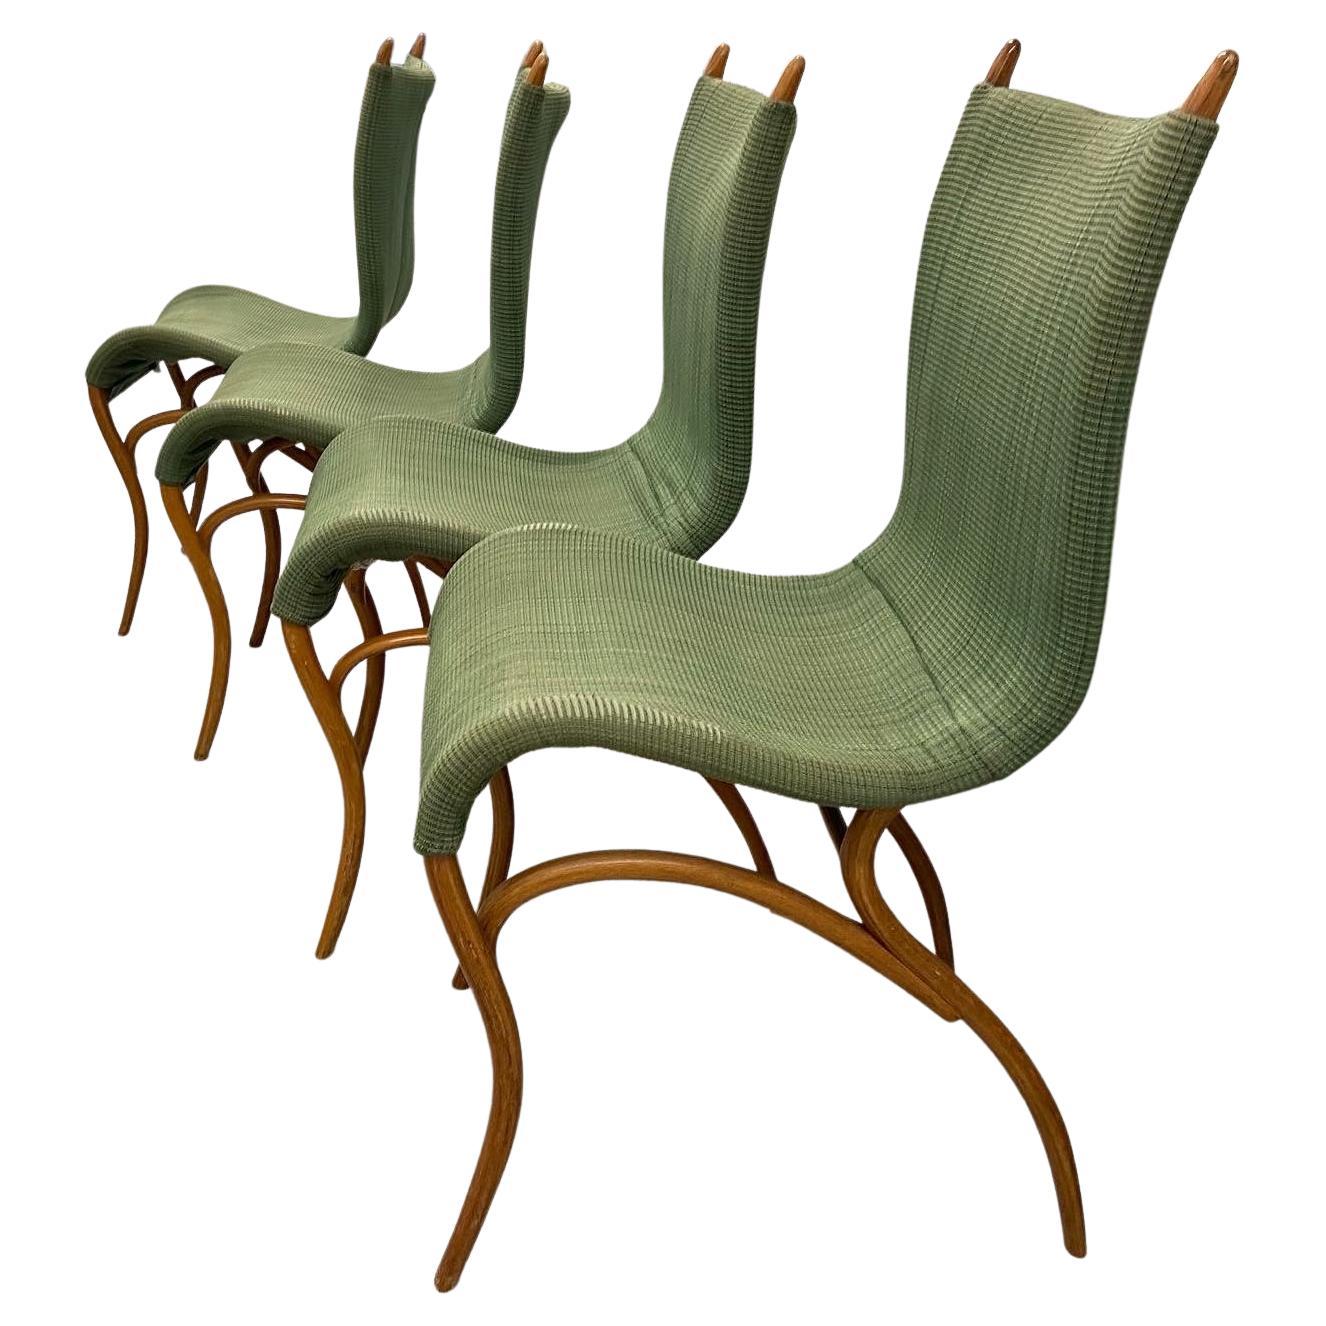 European set of 4 Vintage Bentwood Upholstered Dining Chairs, light and comfortable For Sale